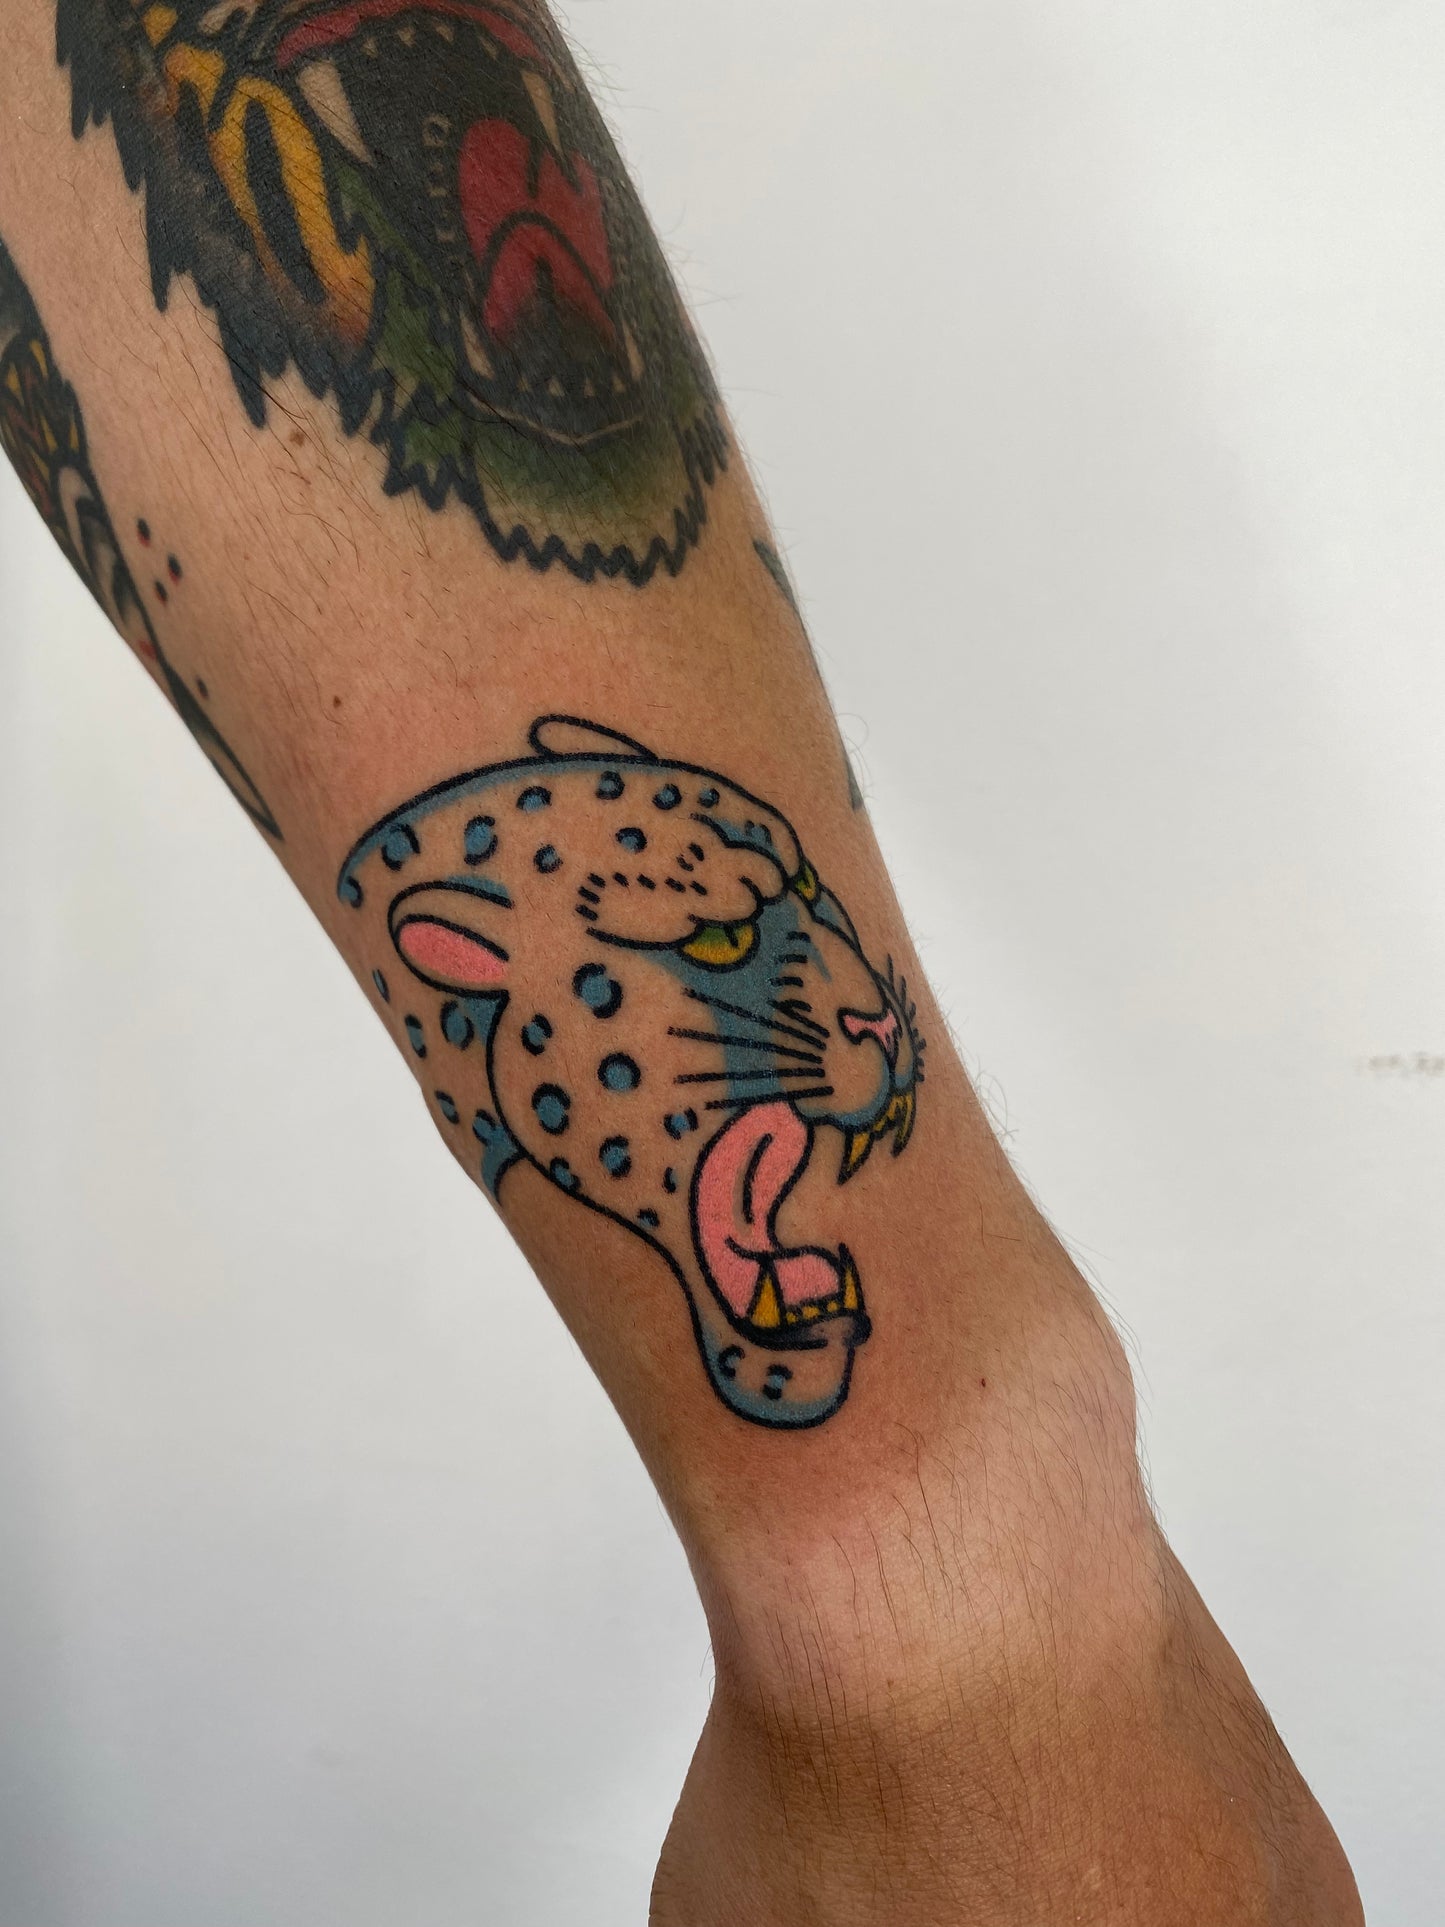 Tattoo Workshop "Learning Handpoke" with Moshi in Barcelona, Spain by subcultours